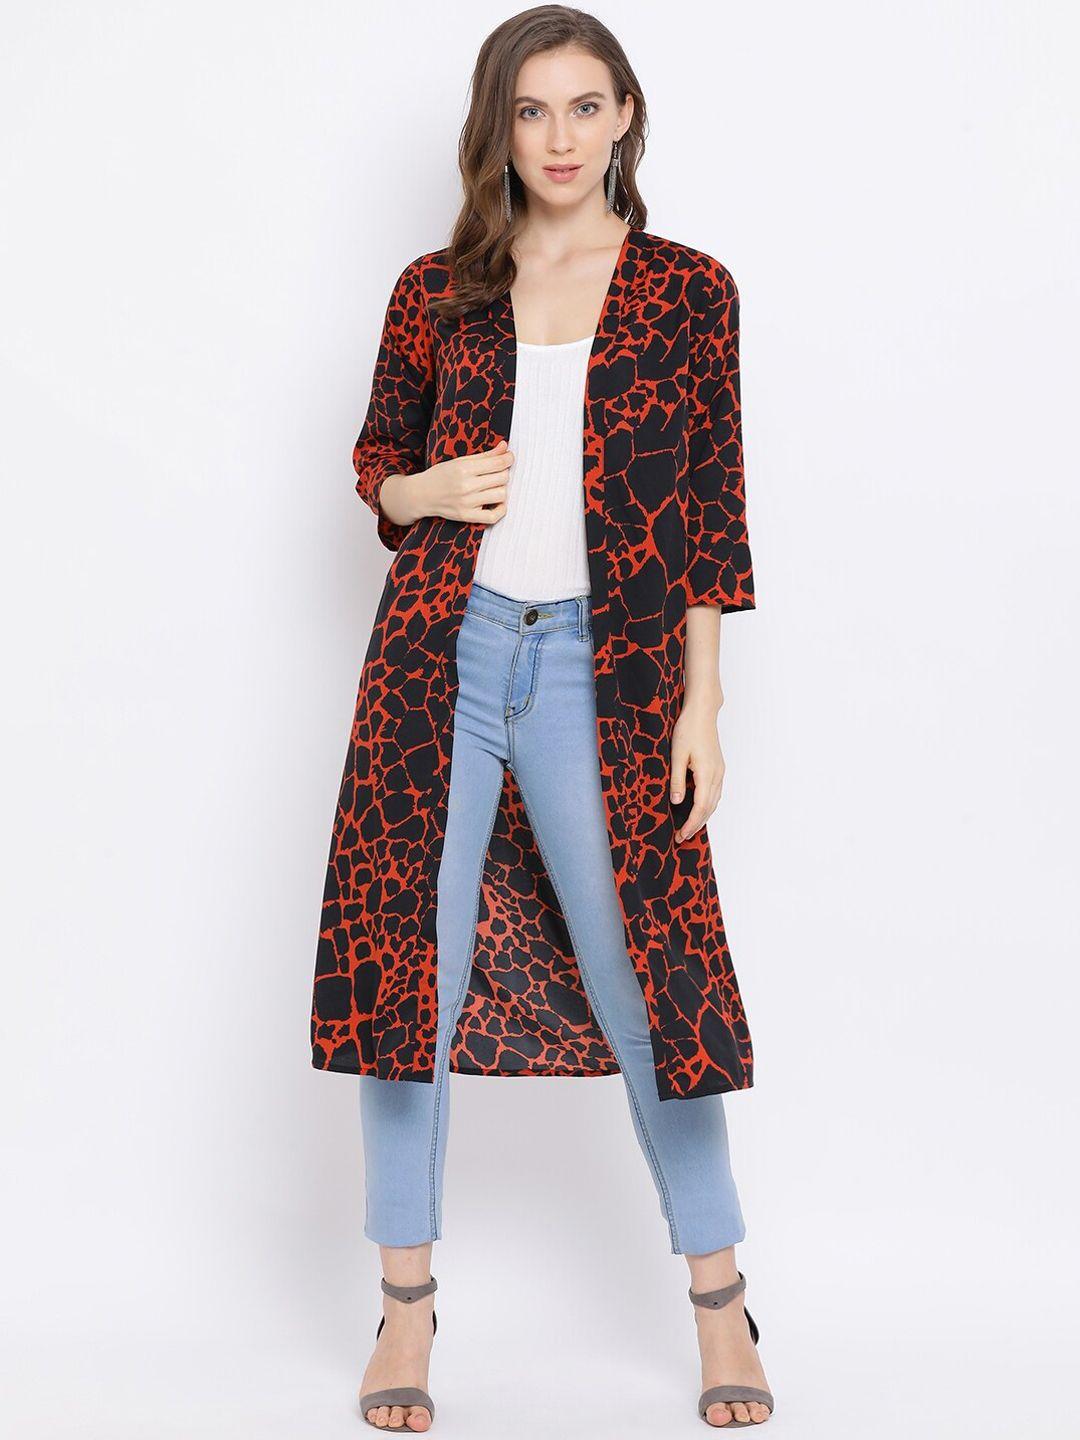 oxolloxo-women-red-&-black-printed-open-front-shrug